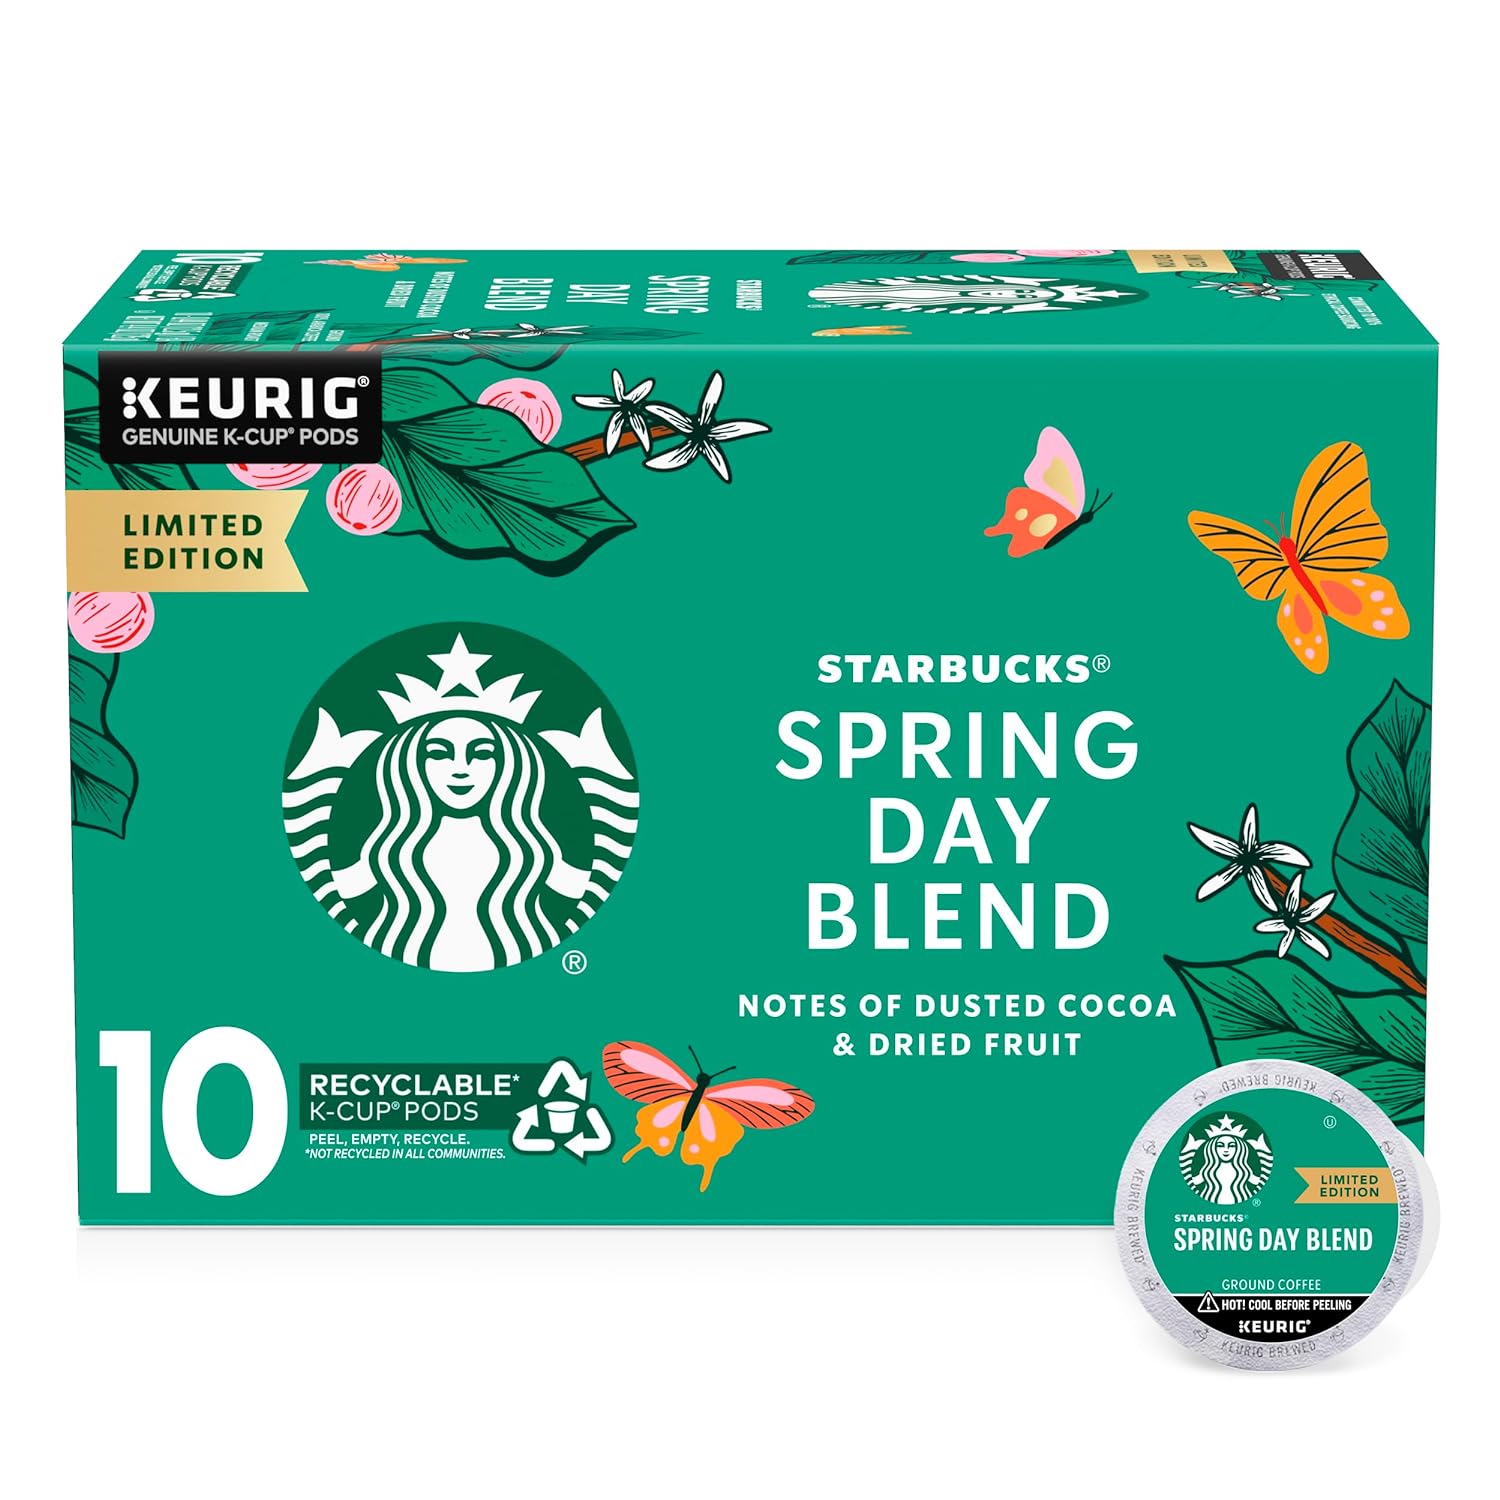 Starbucks K-Cup Coffee Pods, Medium Roast Coffee, Spring Day Blend For Keurig Coffee Makers, 100% Arabica, Limited Edition, 1 Box (10 Pods)